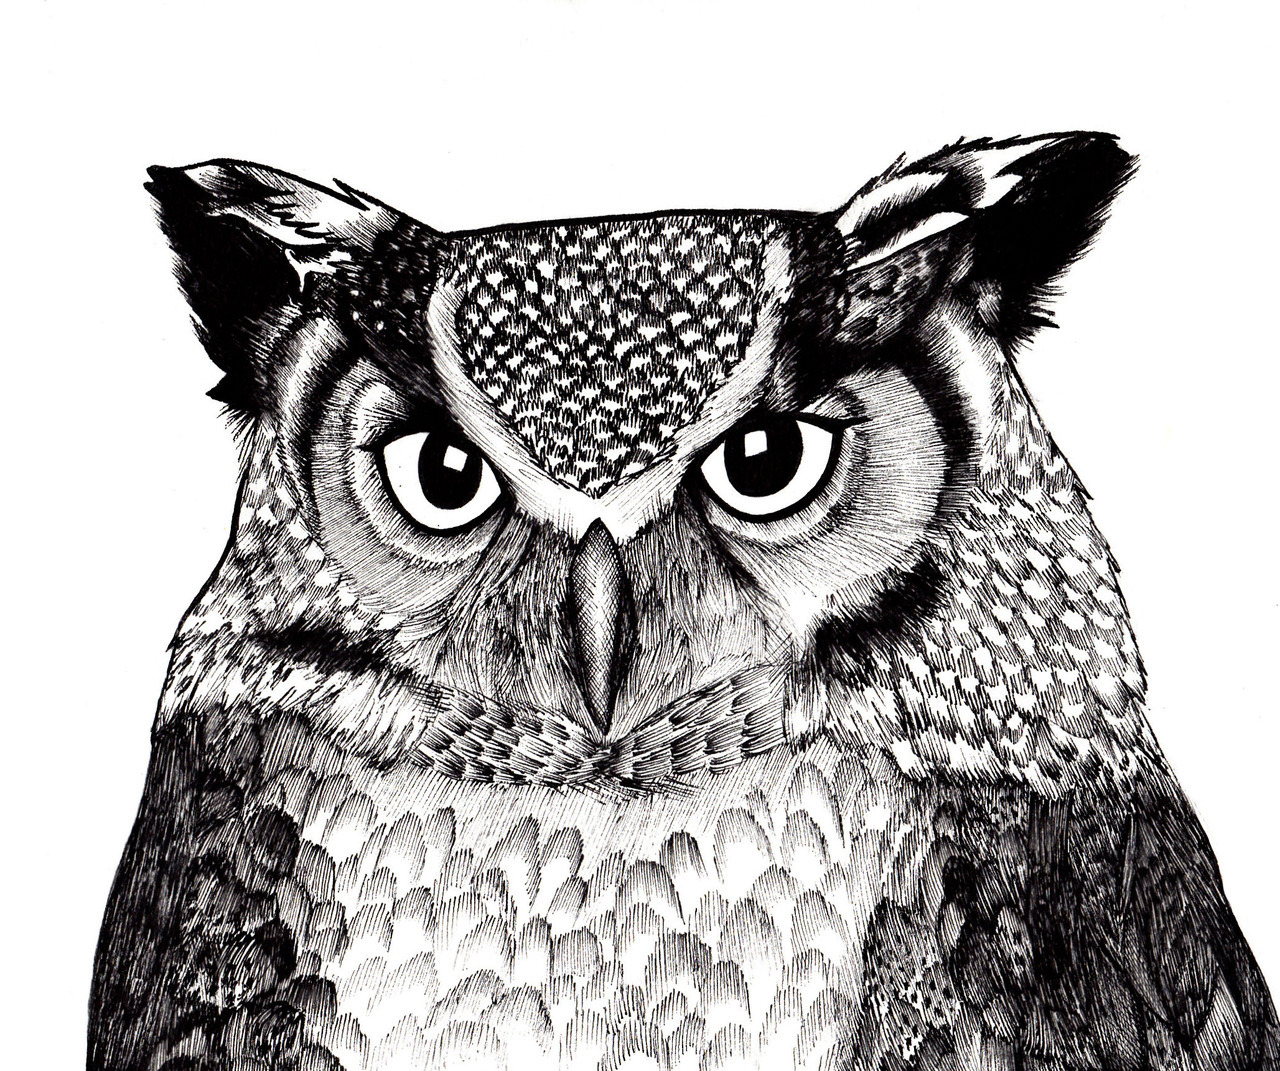 Owly - drawn with fineliners http://lottiedraws.tumblr.com